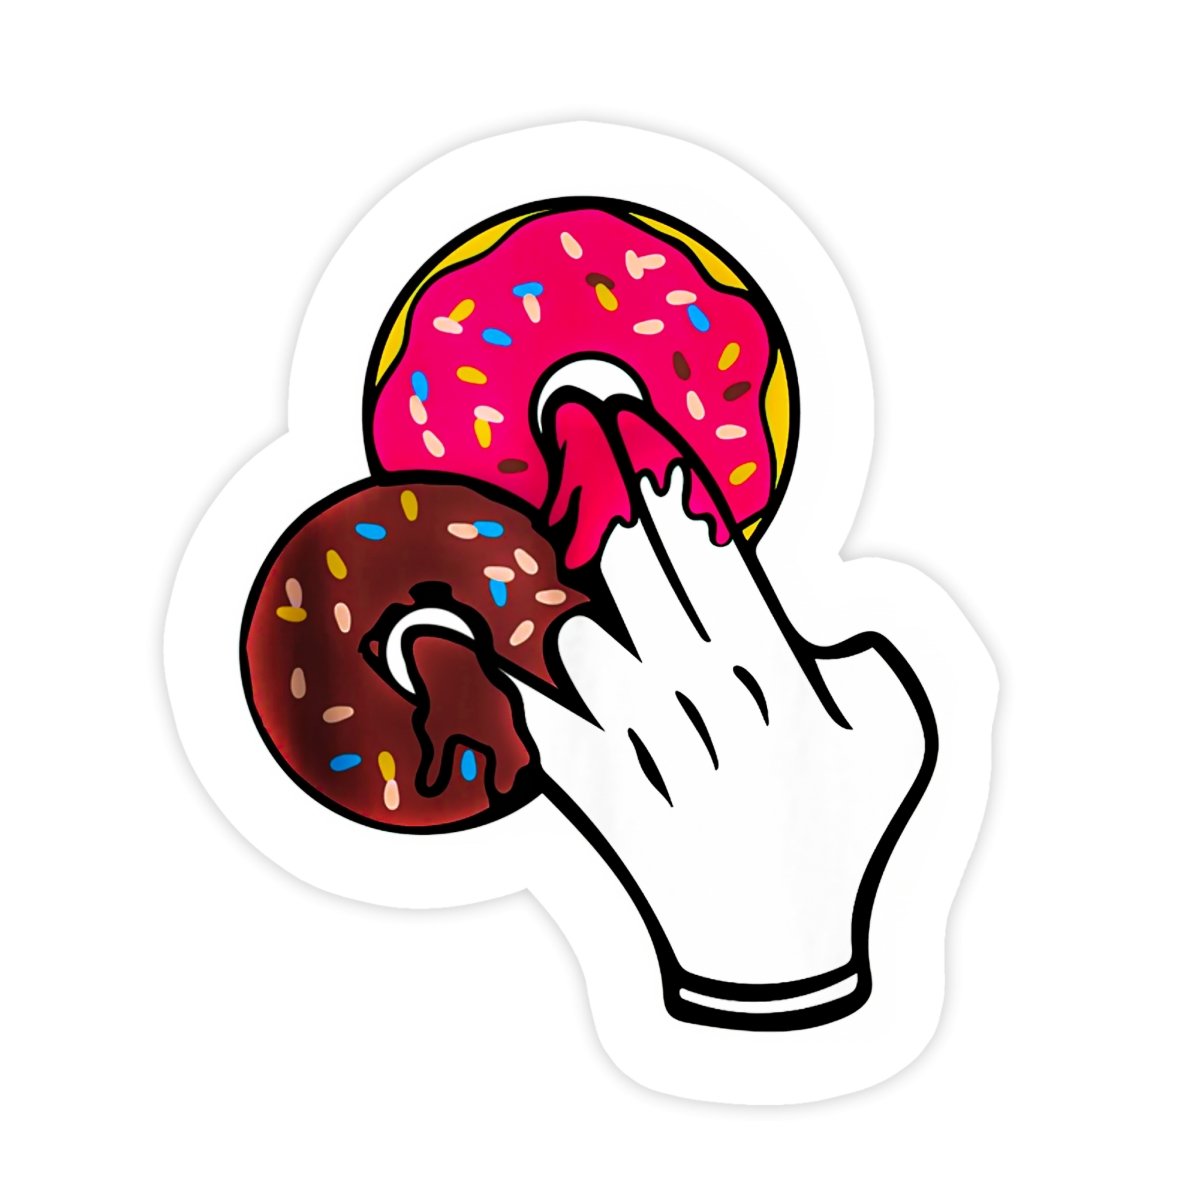 The Shocker Donut 2 In The Pink 1 In The Stink Meme Sticker - stickerbullThe Shocker Donut 2 In The Pink 1 In The Stink Meme StickerRetail StickerstickerbullstickerbullDonutShocker_#134The Shocker Donut 2 In The Pink 1 In The Stink Meme Sticker